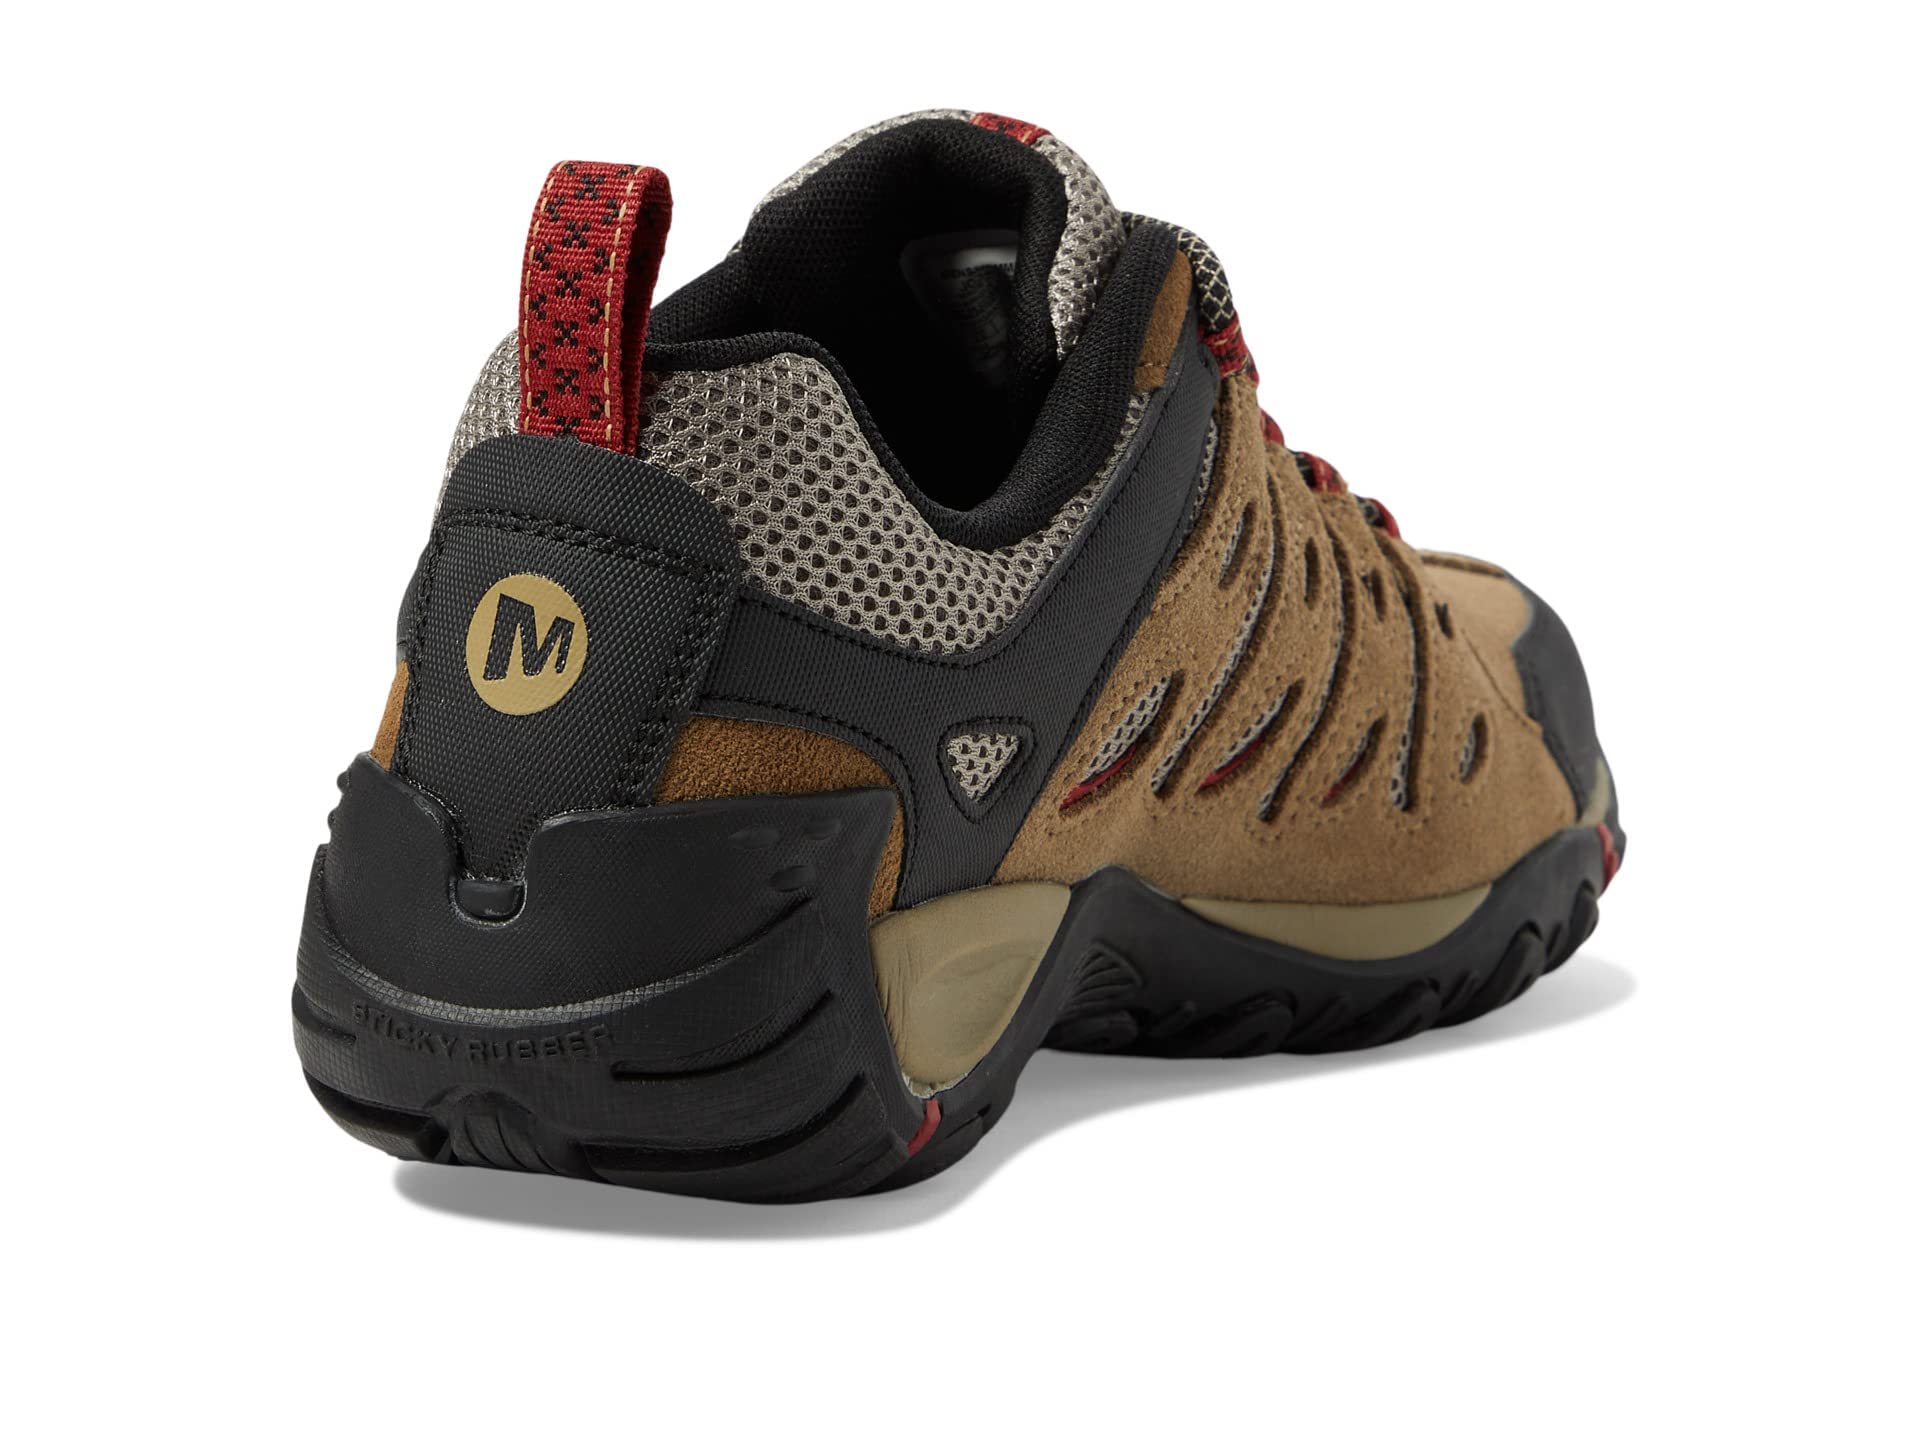 Merrell Crosslander 2 Hiking Shoes for Men - Lace Up Closure with Anti-Slip and Gripping Sole, and Breathable Shoes Kangaroo 10 M